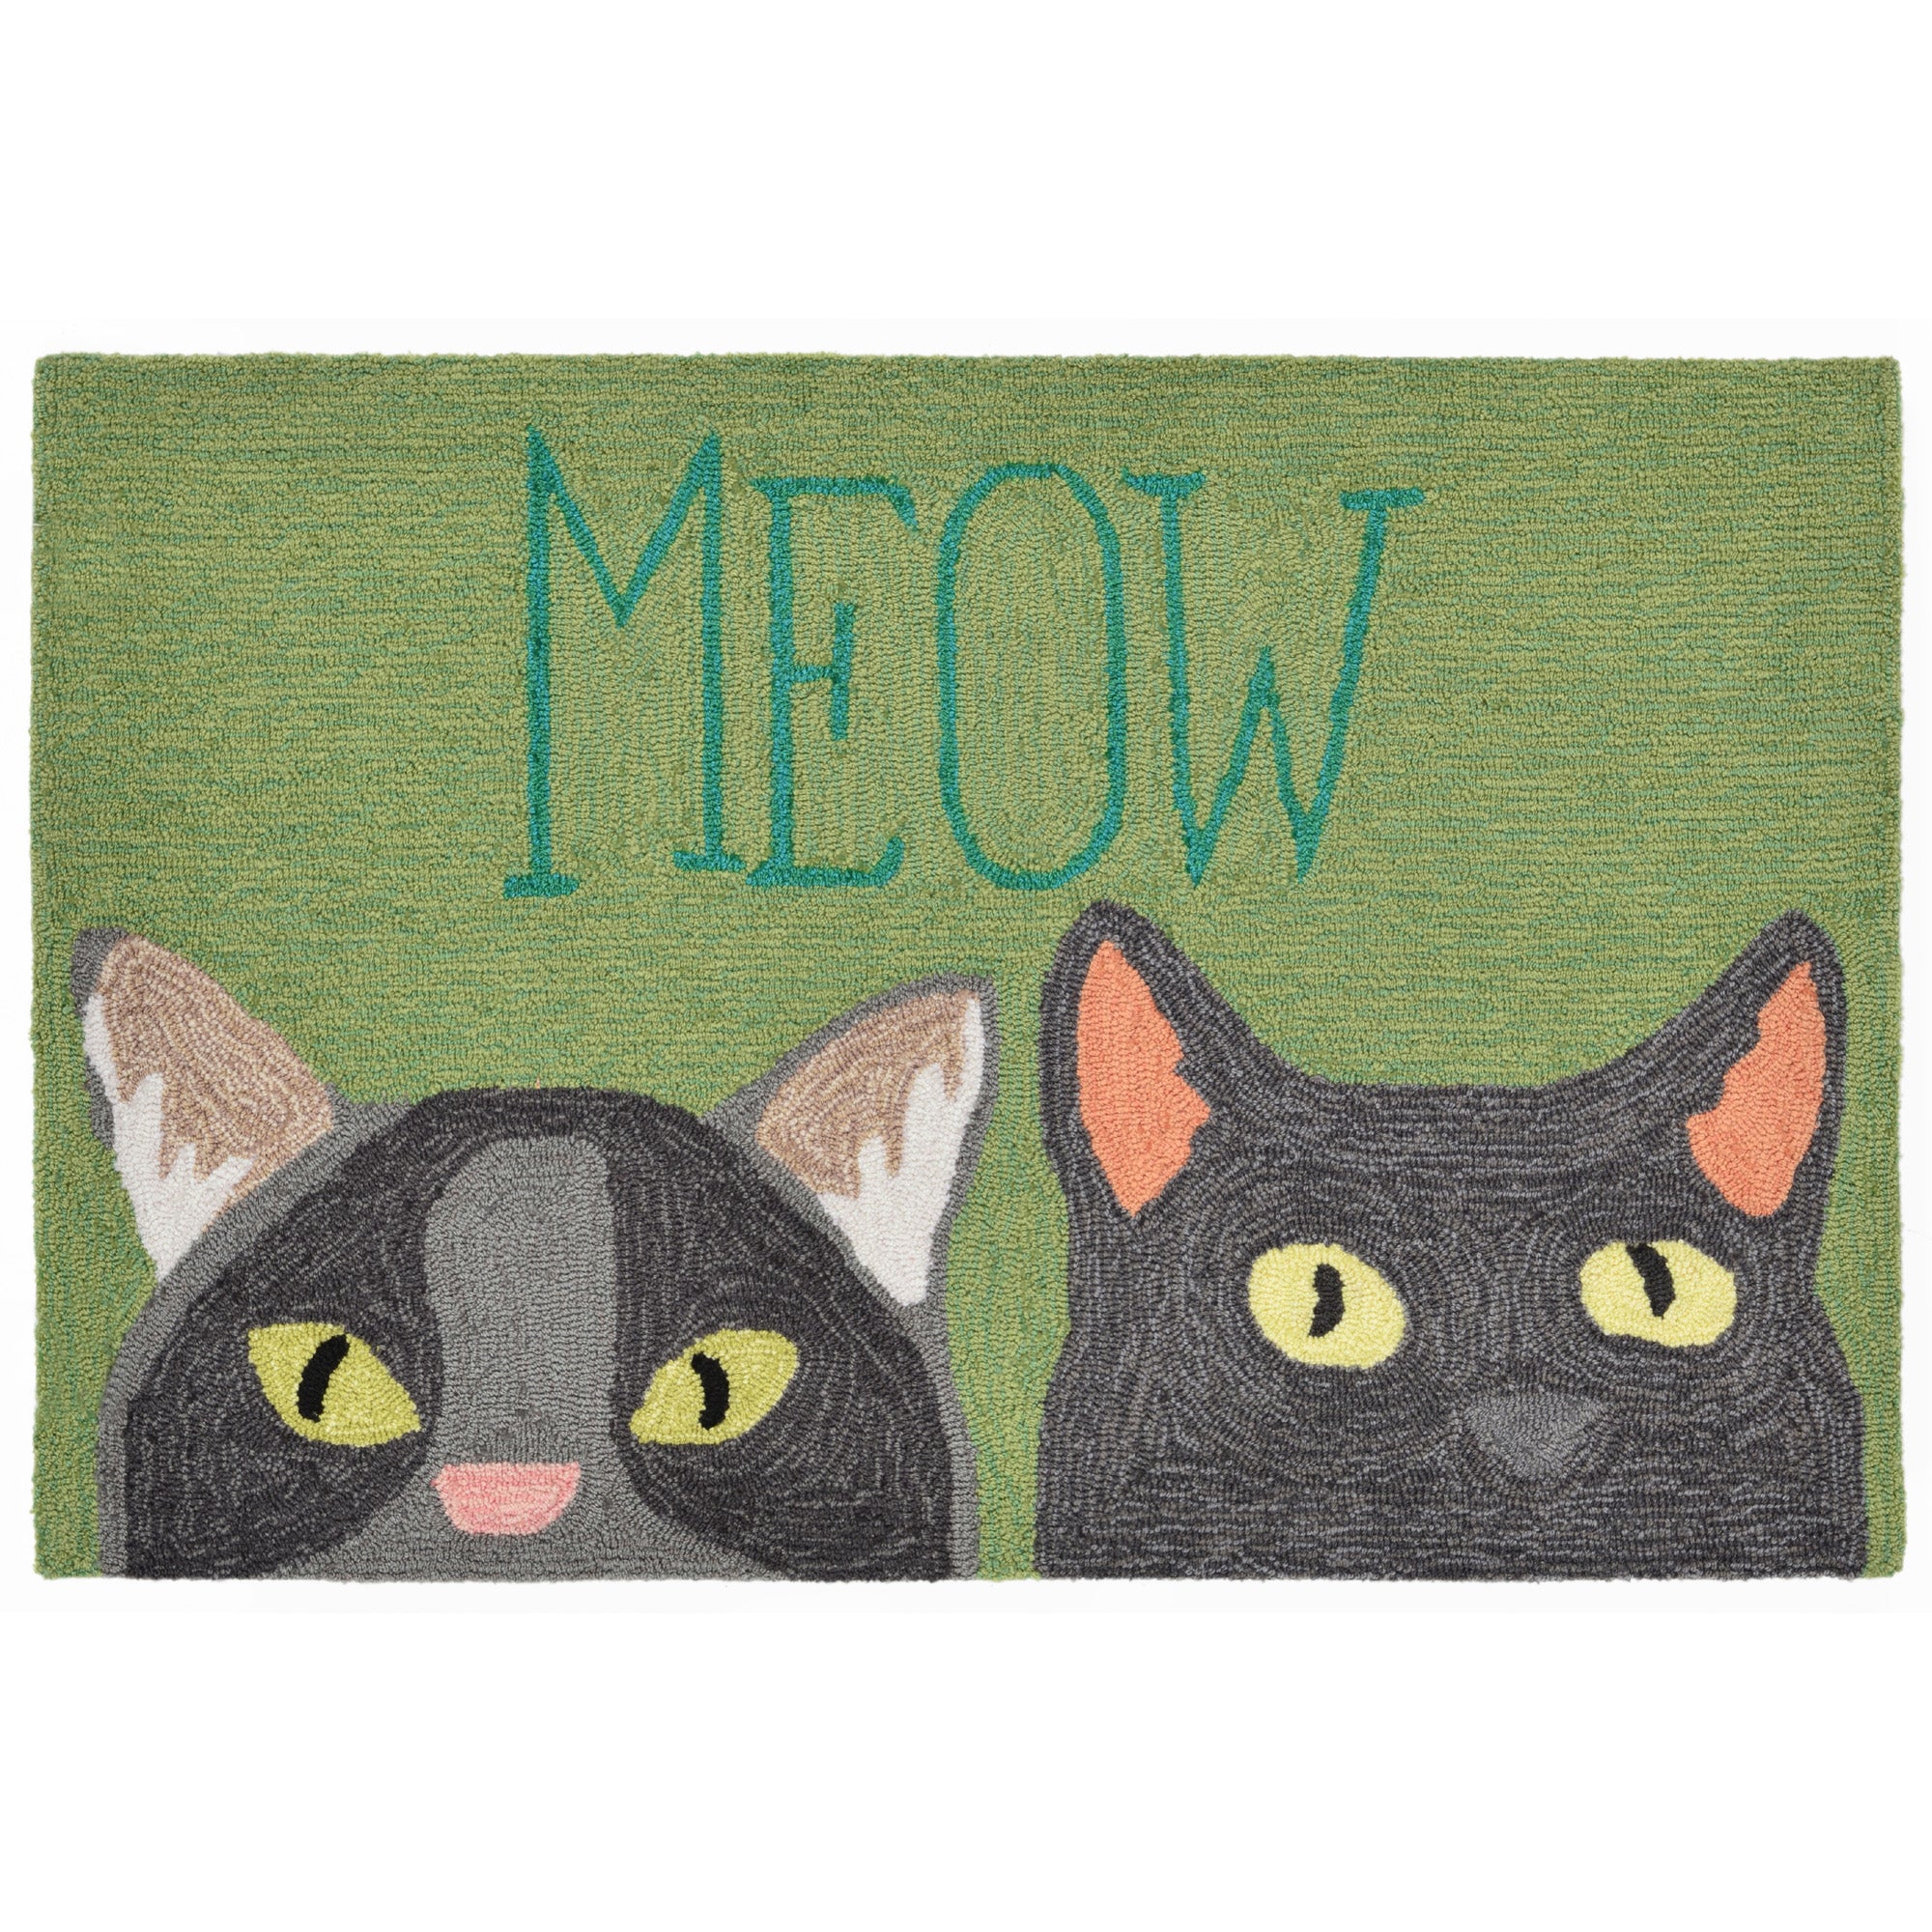 Trans-ocean Imports Ftp12182106 Liora Manne Frontporch Meow Indoor/outdoor Rug Green 20"x30"